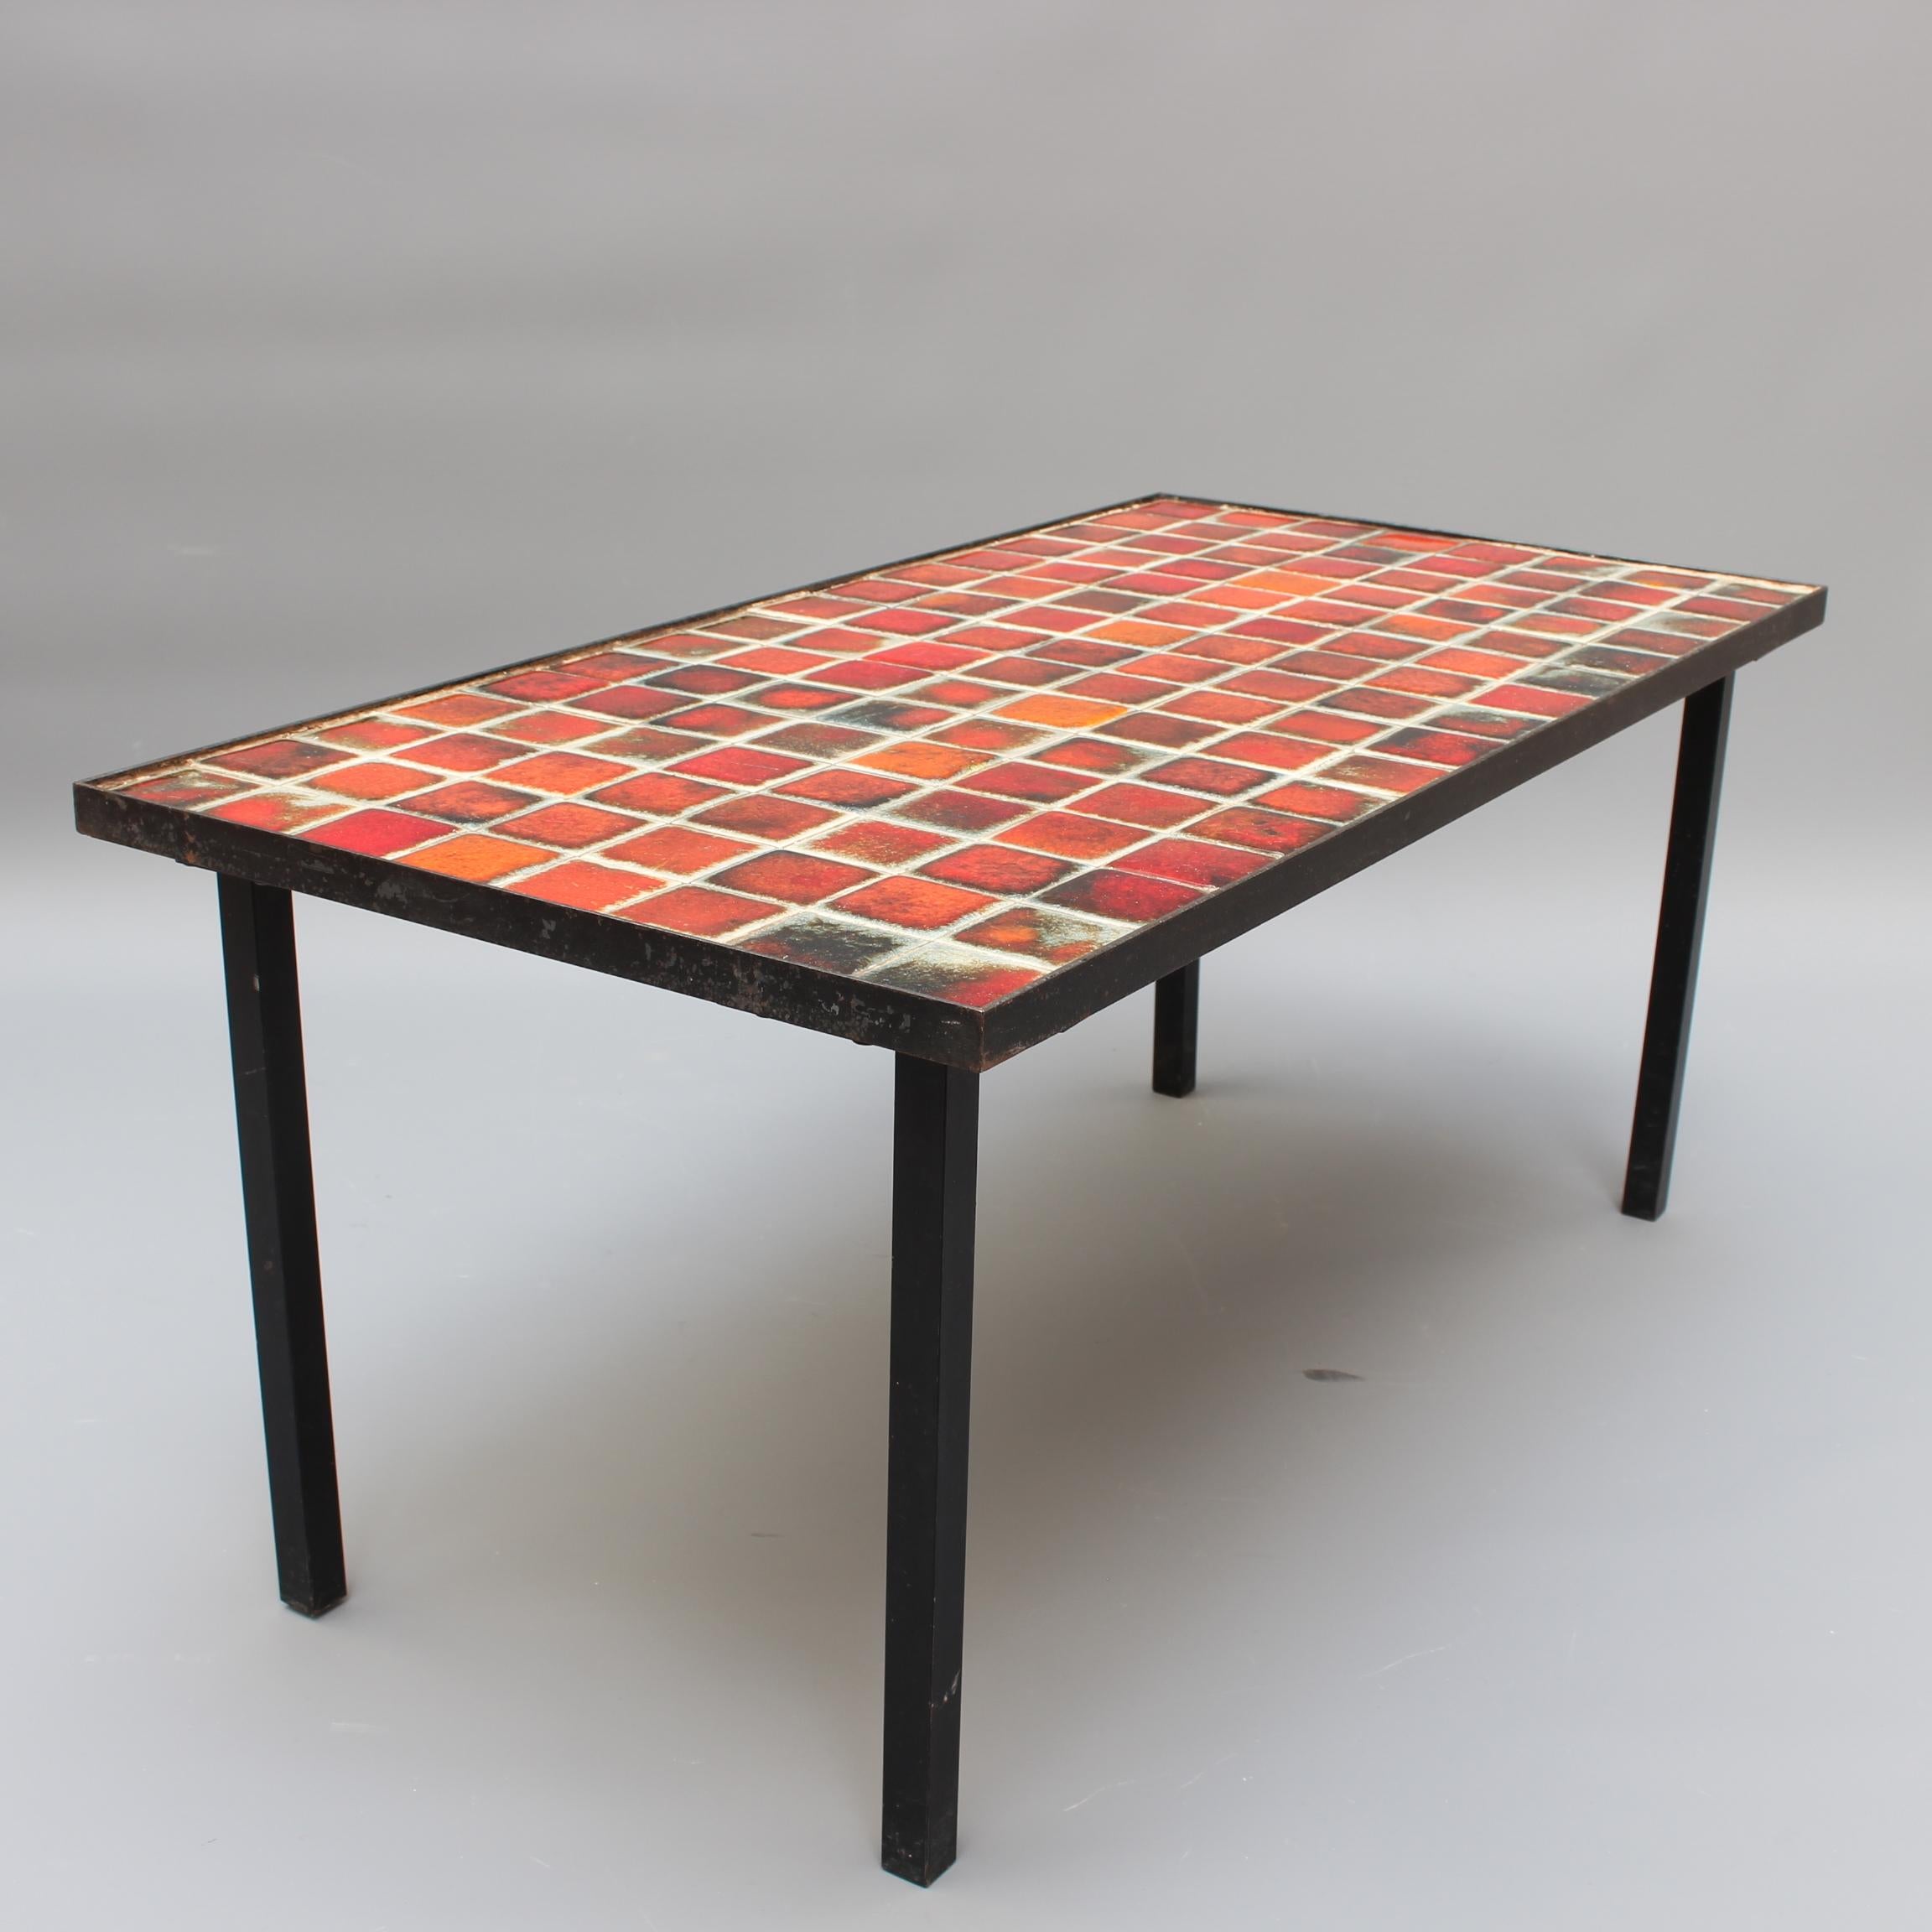 Glazed Ceramic Low Table with Red-Hued Tiles by Mado Jolain 'circa 1950s'